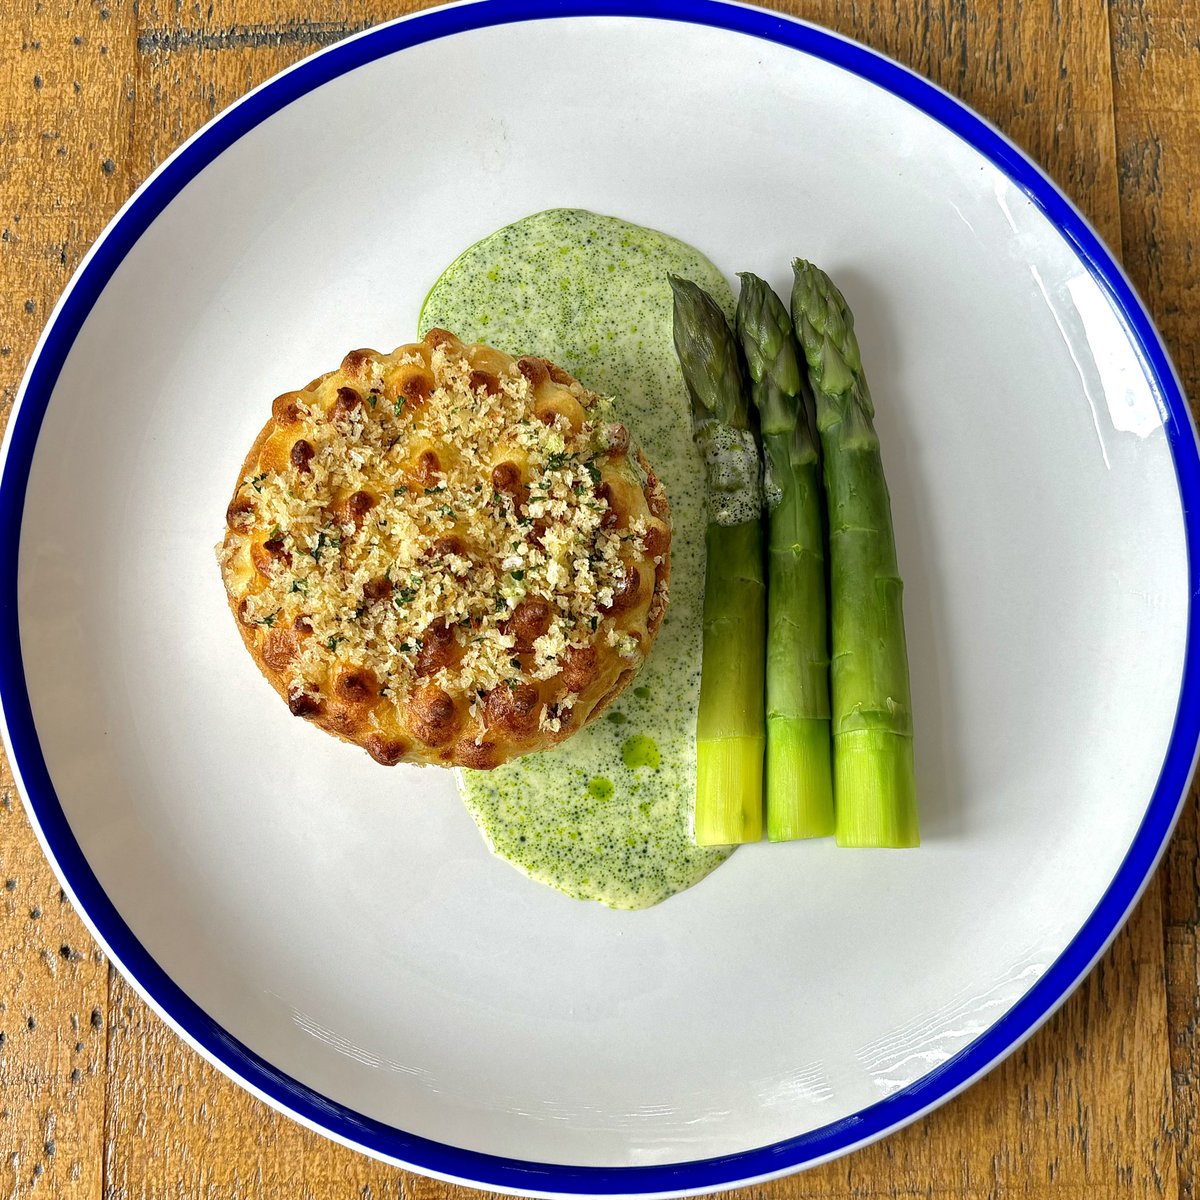 Smoked fish pie, Spilmans asparagus, wild garlic cream. Served with a side of triple cooked chips. Nuff said. Running all day tomorrow